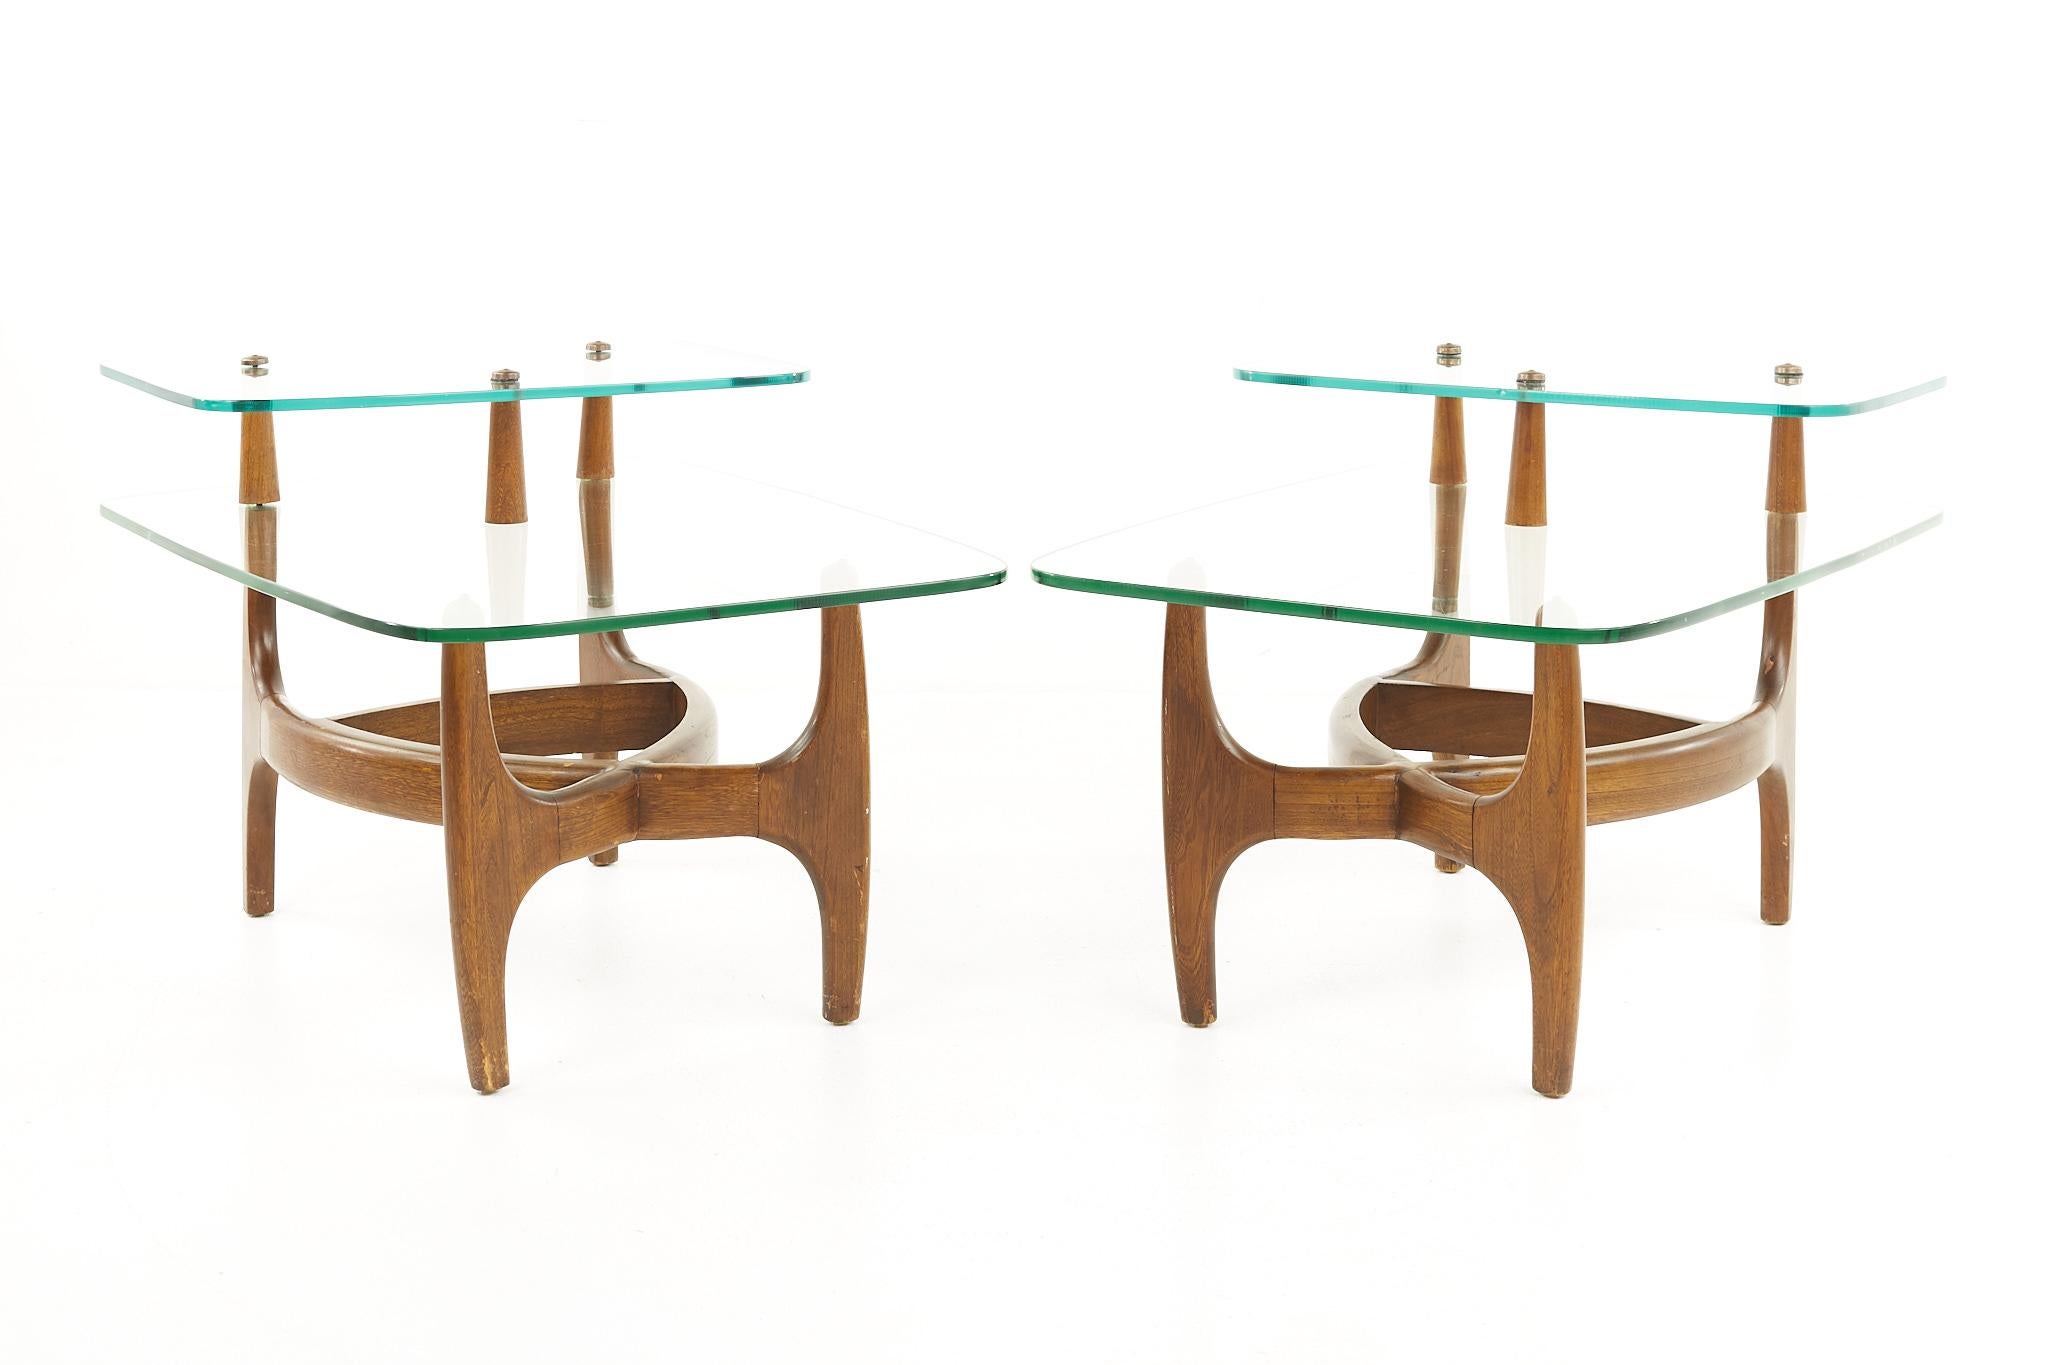 Adrian Pearsall Kroehler style mid century side tables - pair

Each table measures: 23 wide x 33 deep x 20 inches high

All pieces of furniture can be had in what we call restored vintage condition. That means the piece is restored upon purchase